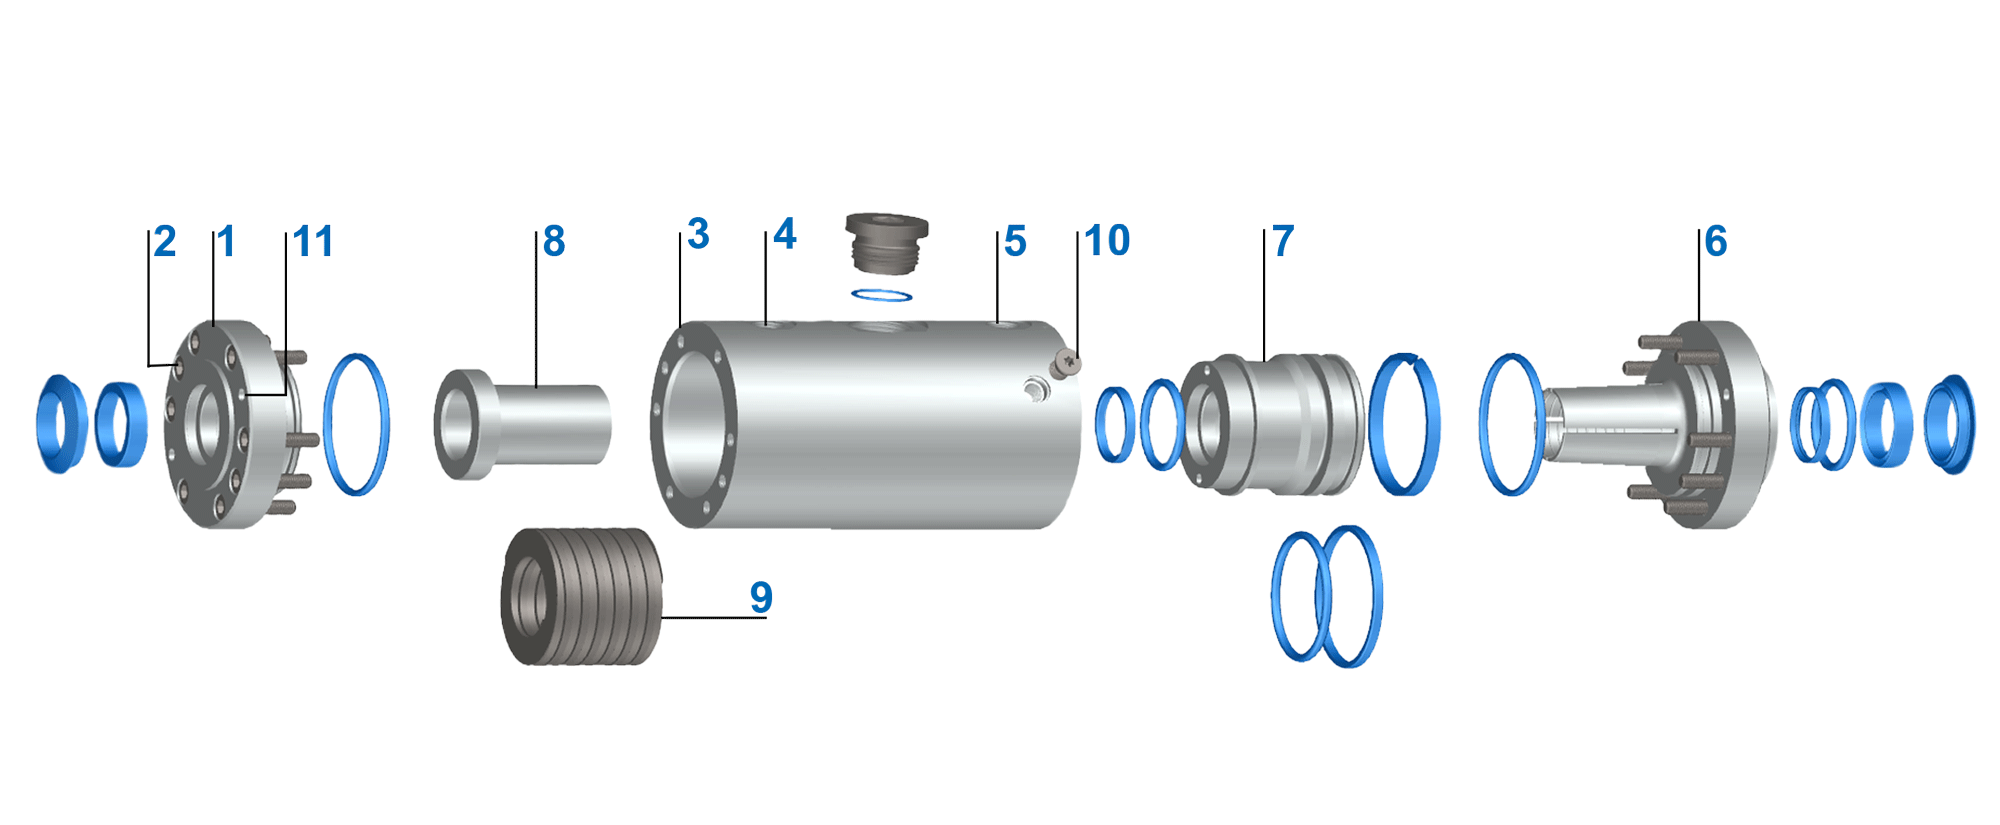 Structure of clamping unit